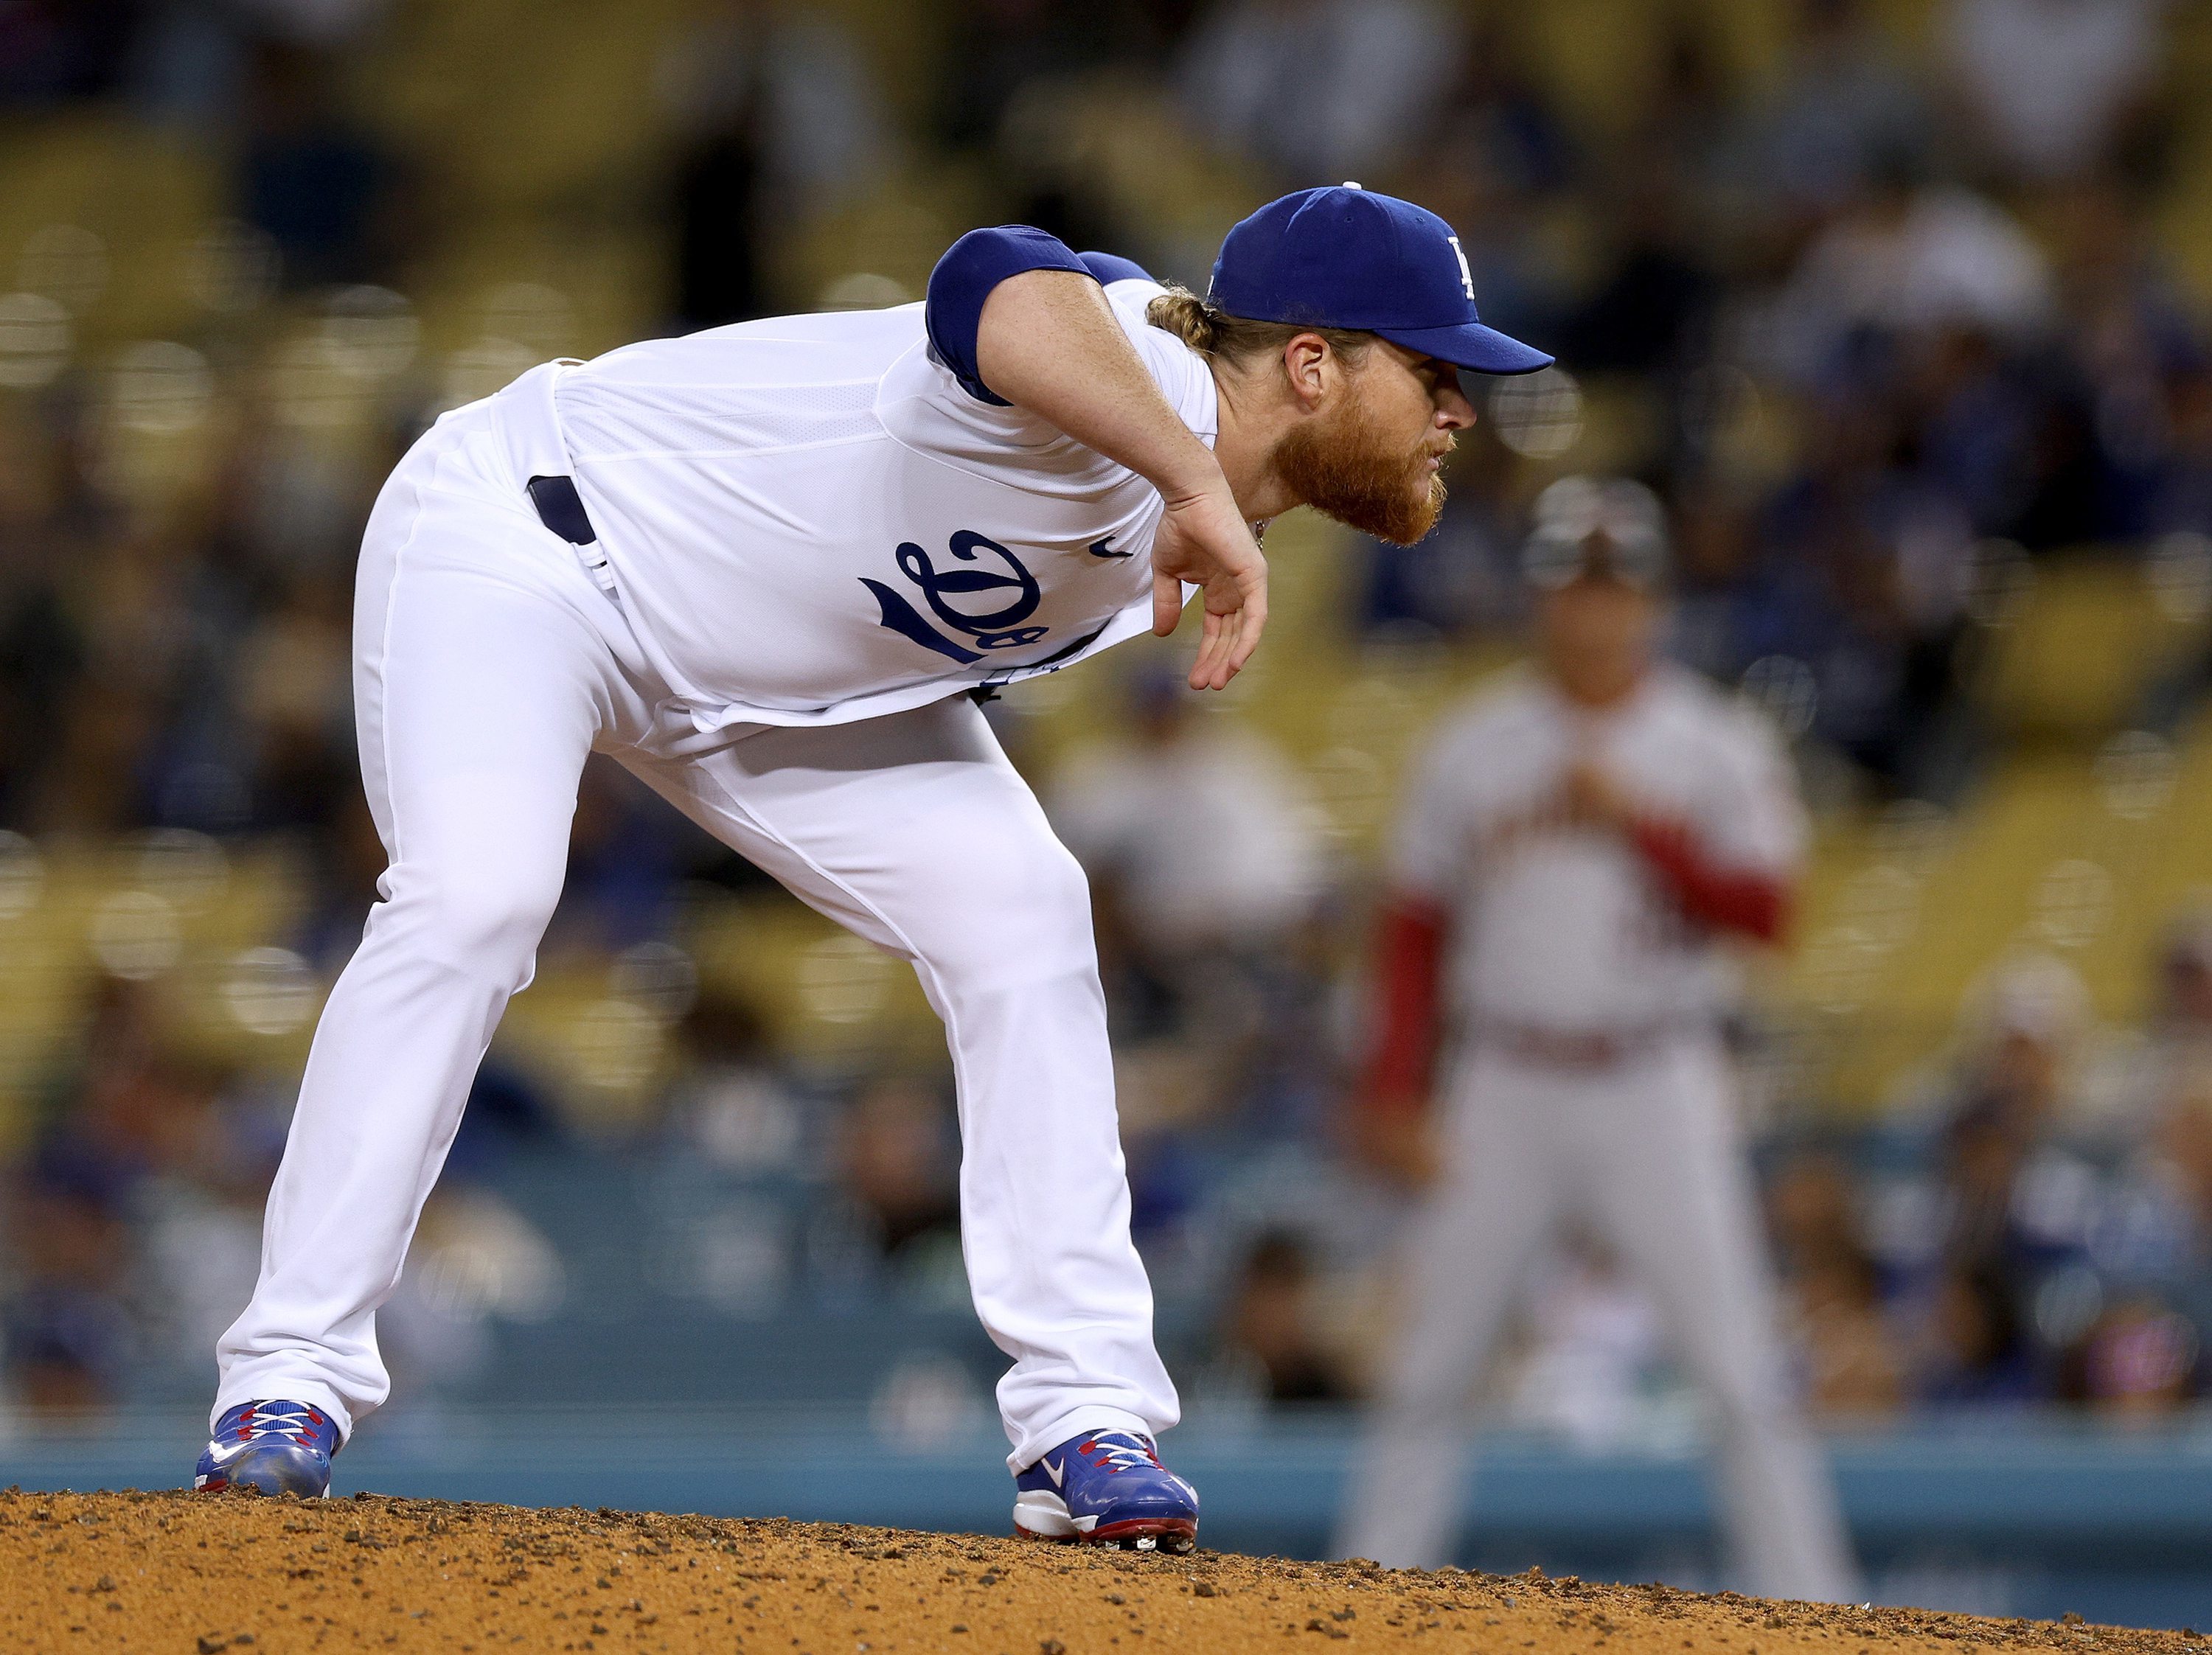 Ex-Red Sox closer Craig Kimbrel signs with Phillies, reunites with